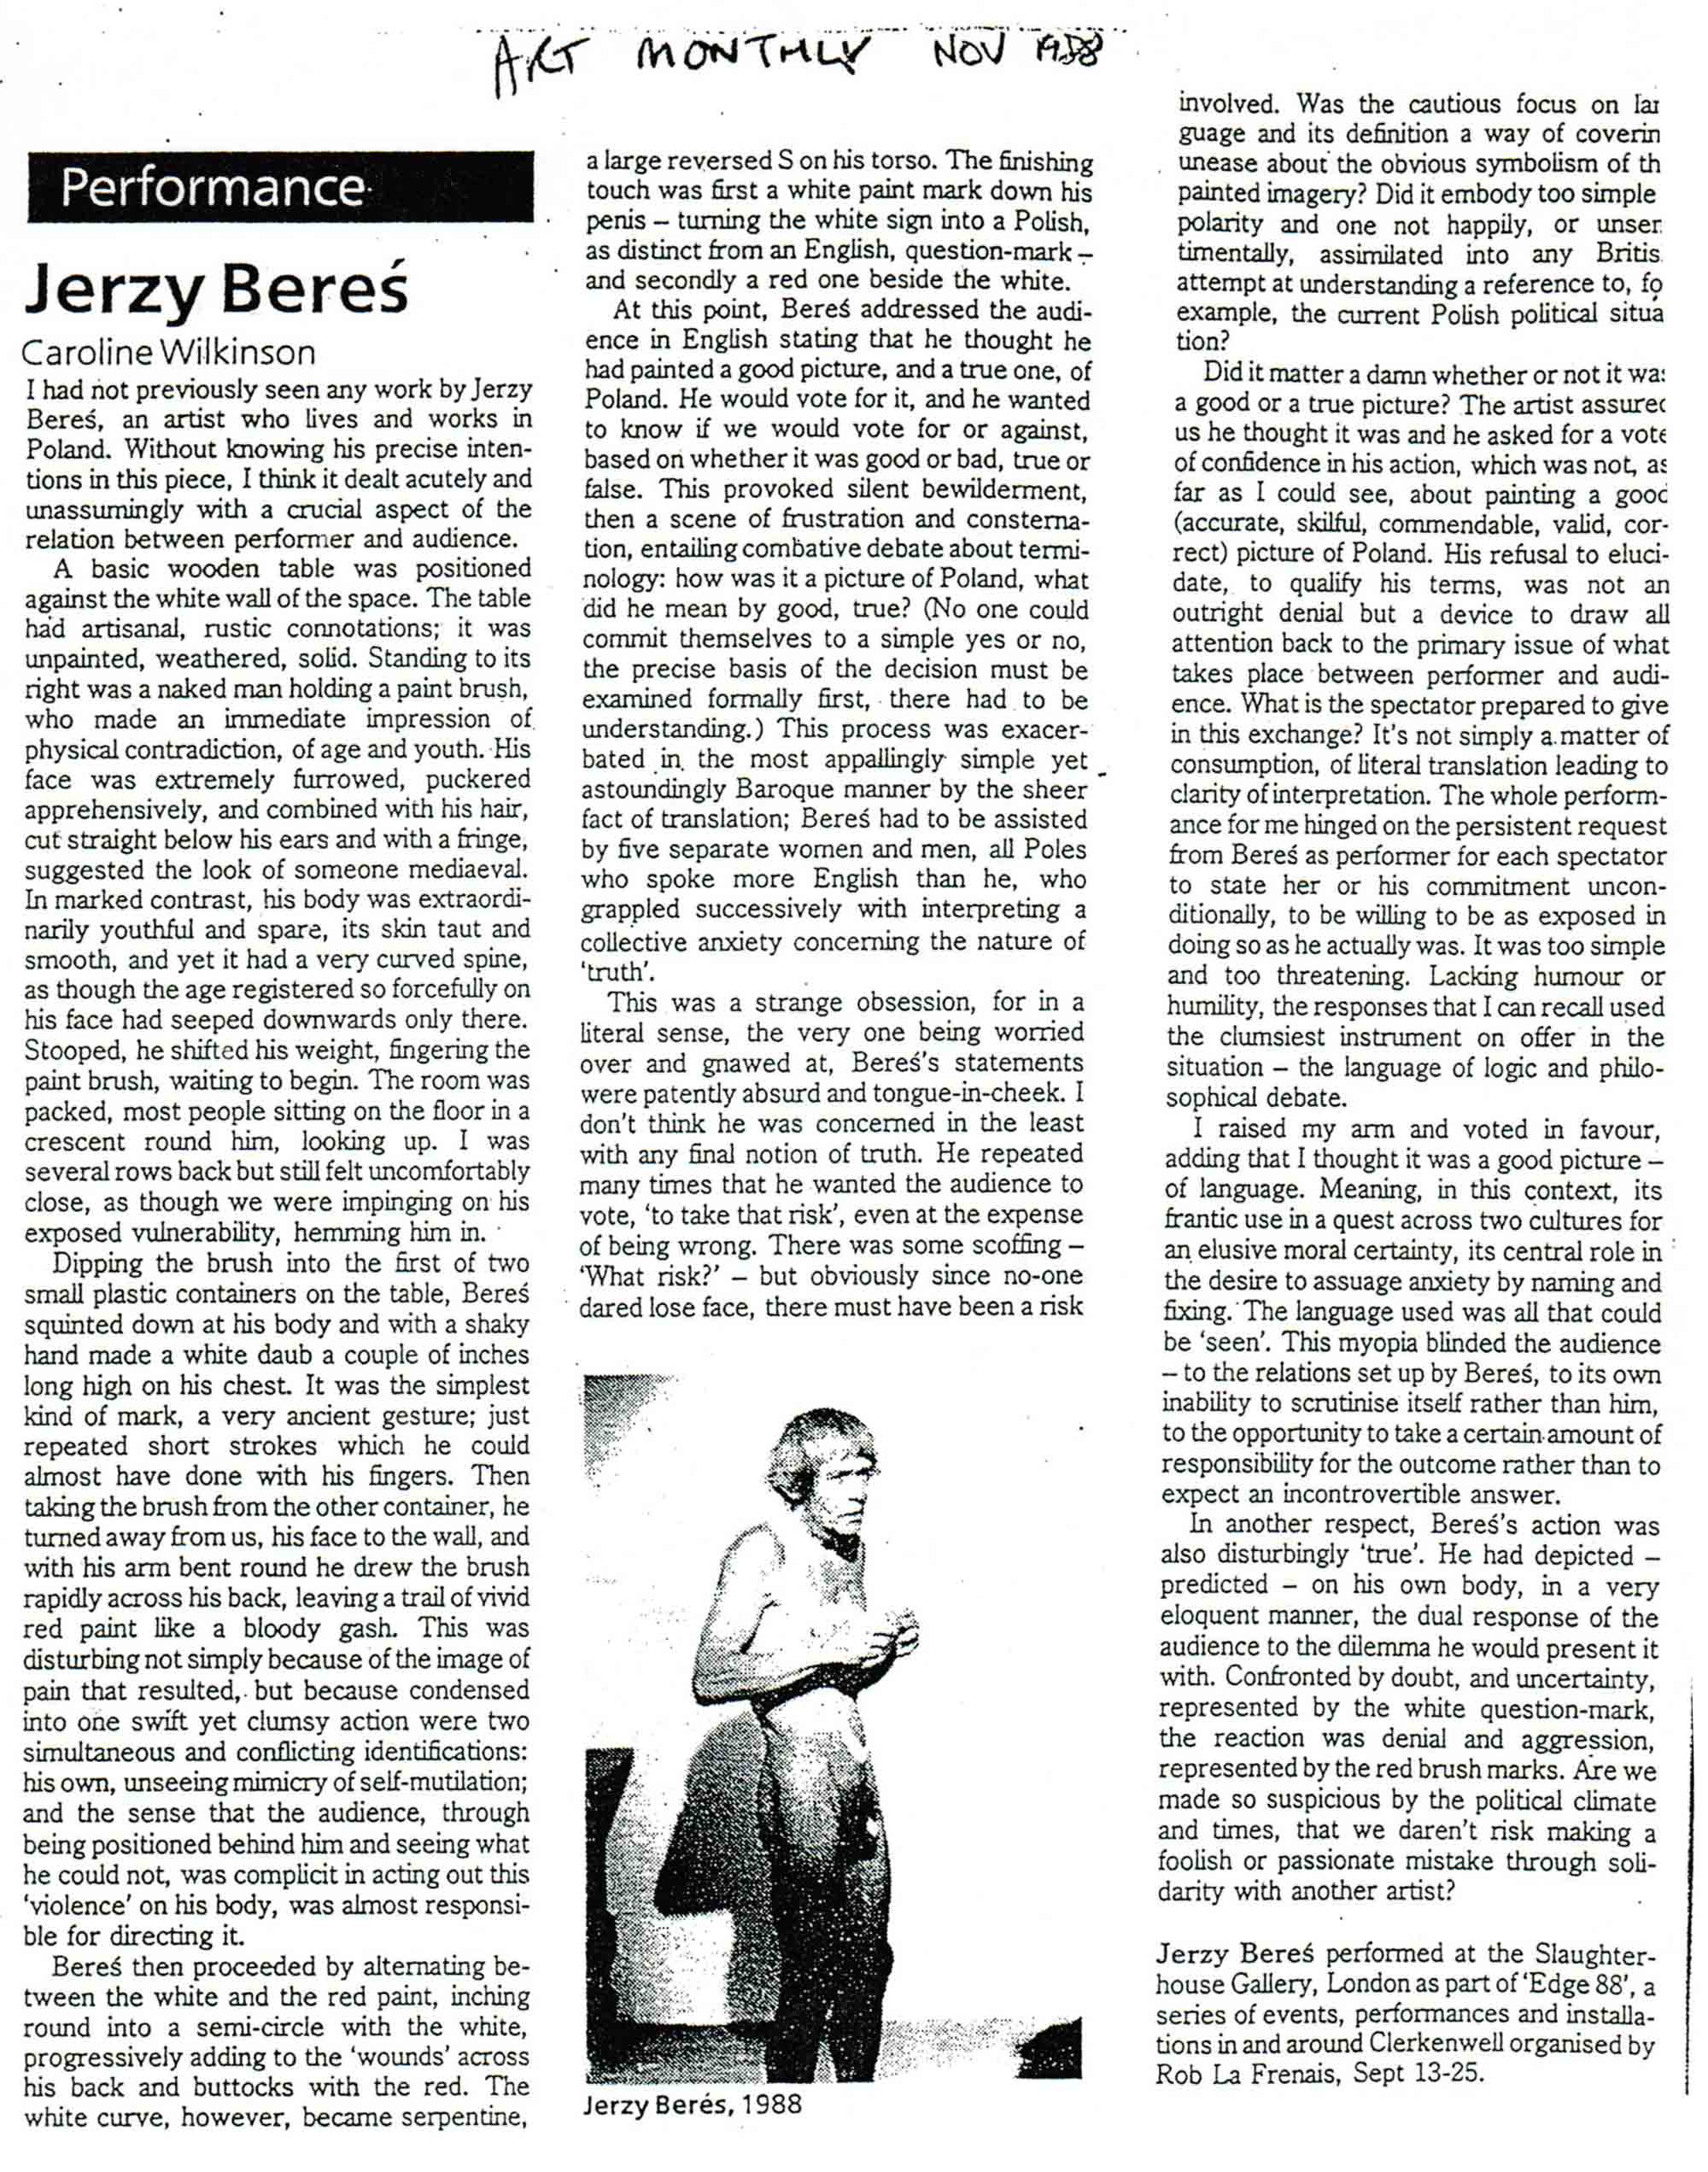 Article by Caroline Wilkinson, Performance Jerzy Beres in EDGE 88, Art Monthly, November 1988